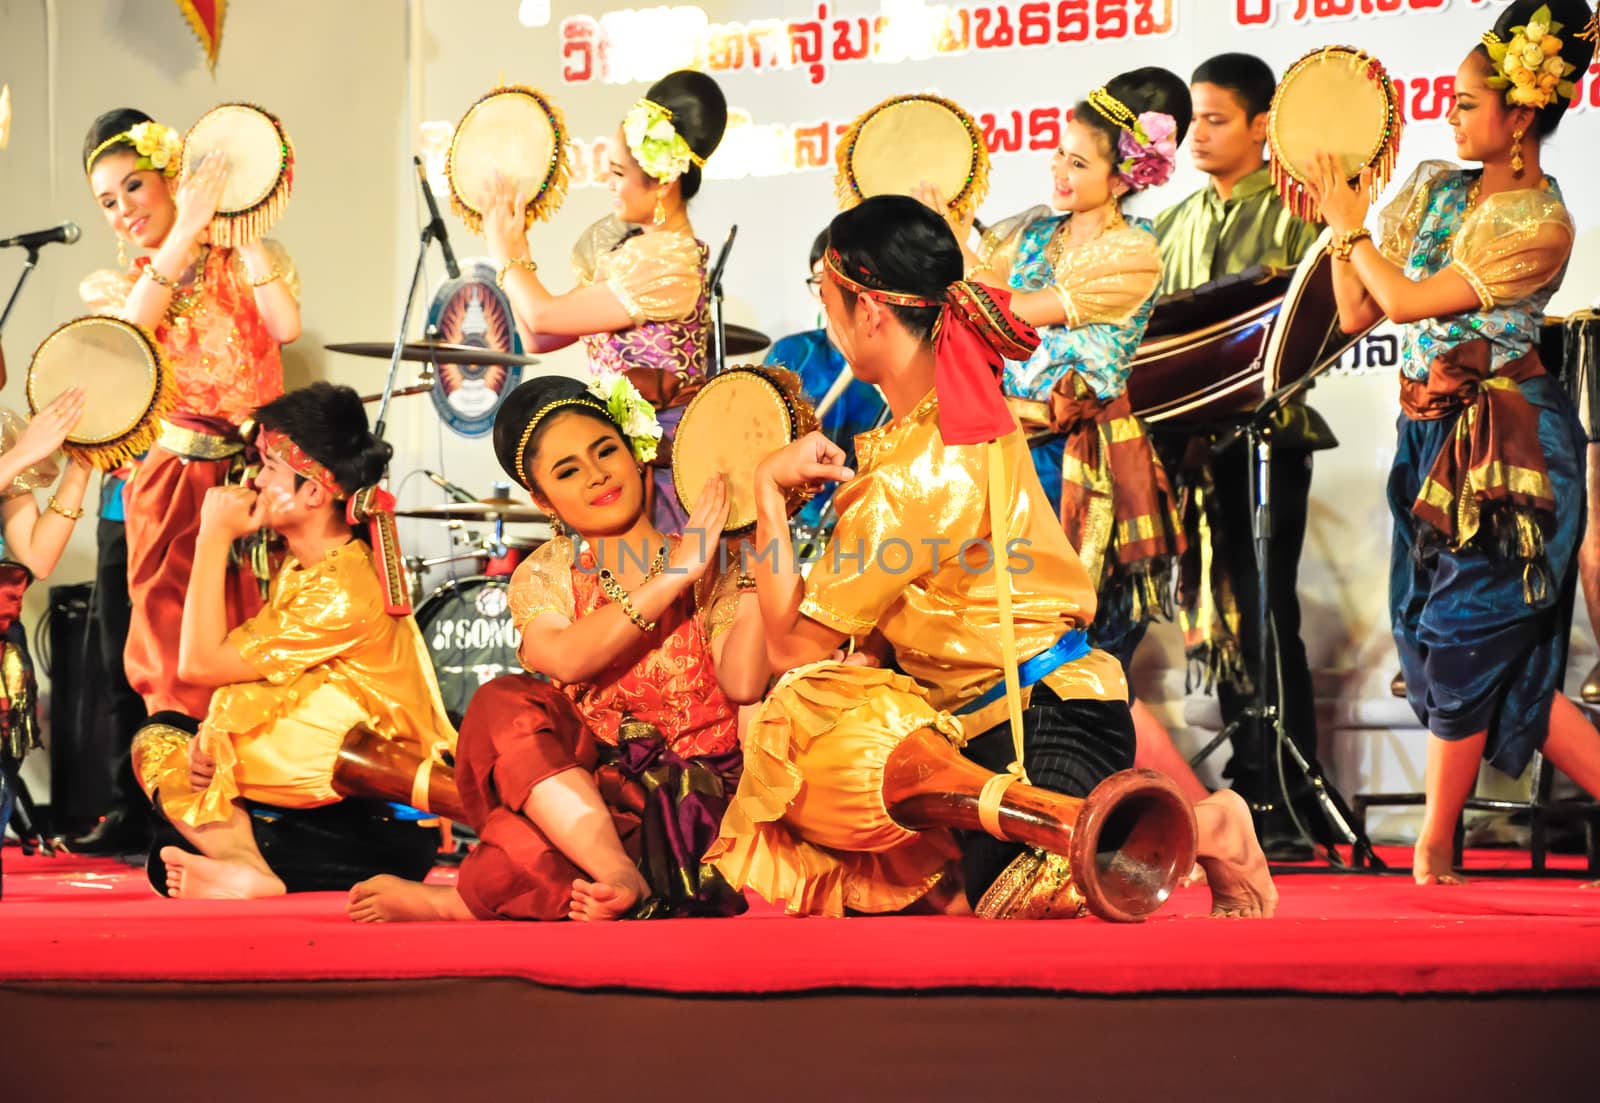 Lopburi, Thailand.- February 21, 2014 : The cultural drum dance show in the event King Narai Reign Fair 2014, take place in the Narai Ratchaniwet,on February 21, 2014 in Lopburi, Thailand.